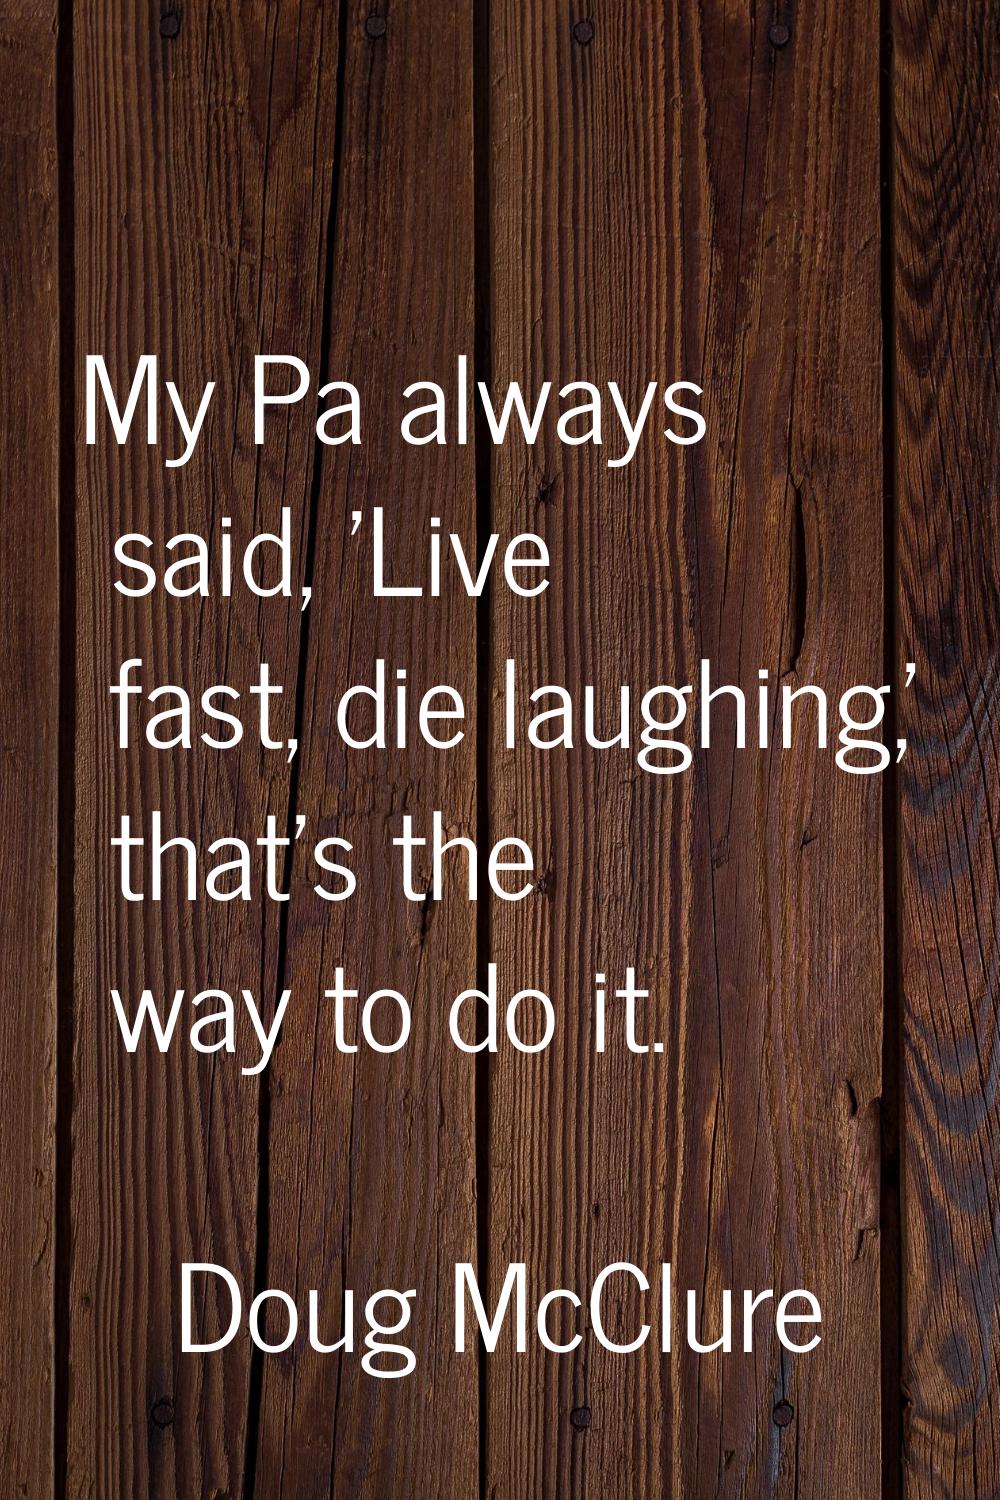 My Pa always said, 'Live fast, die laughing,' that's the way to do it.